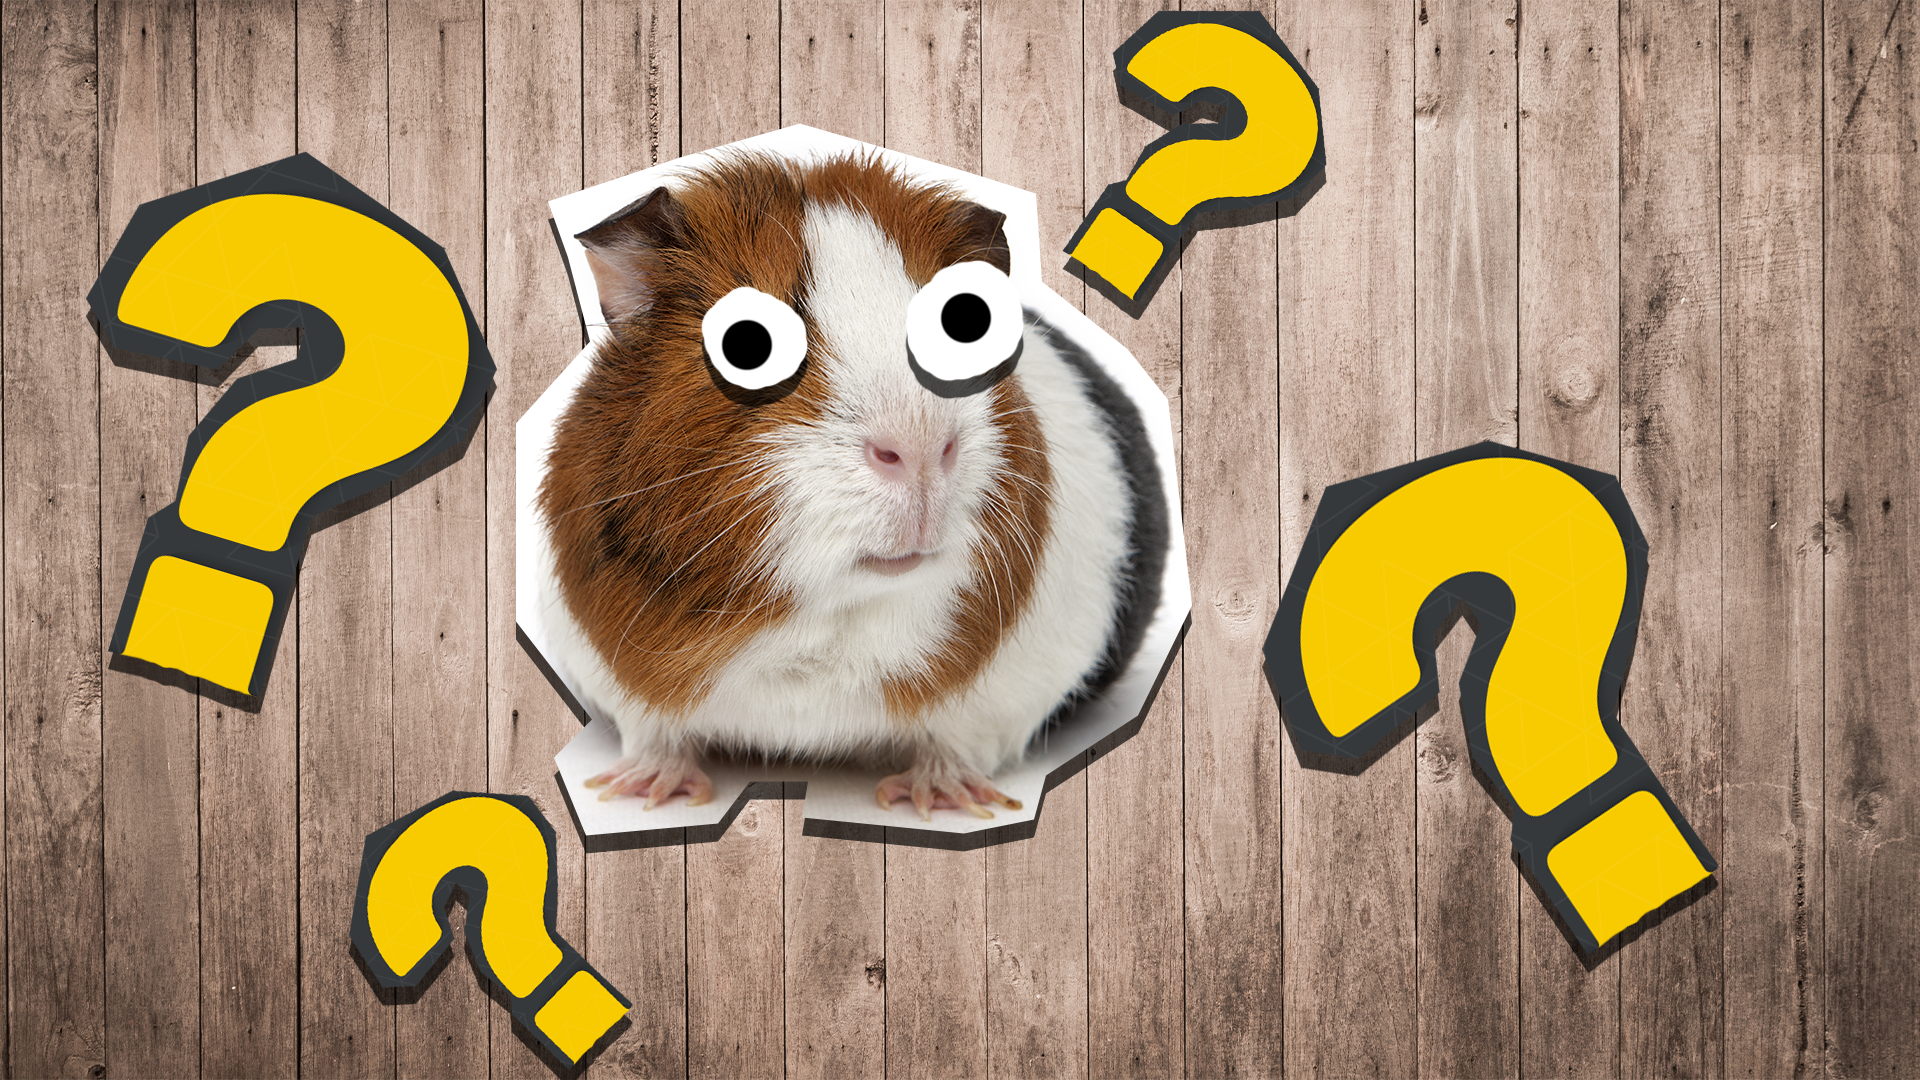 Guinea Pig and question marks on wooden background